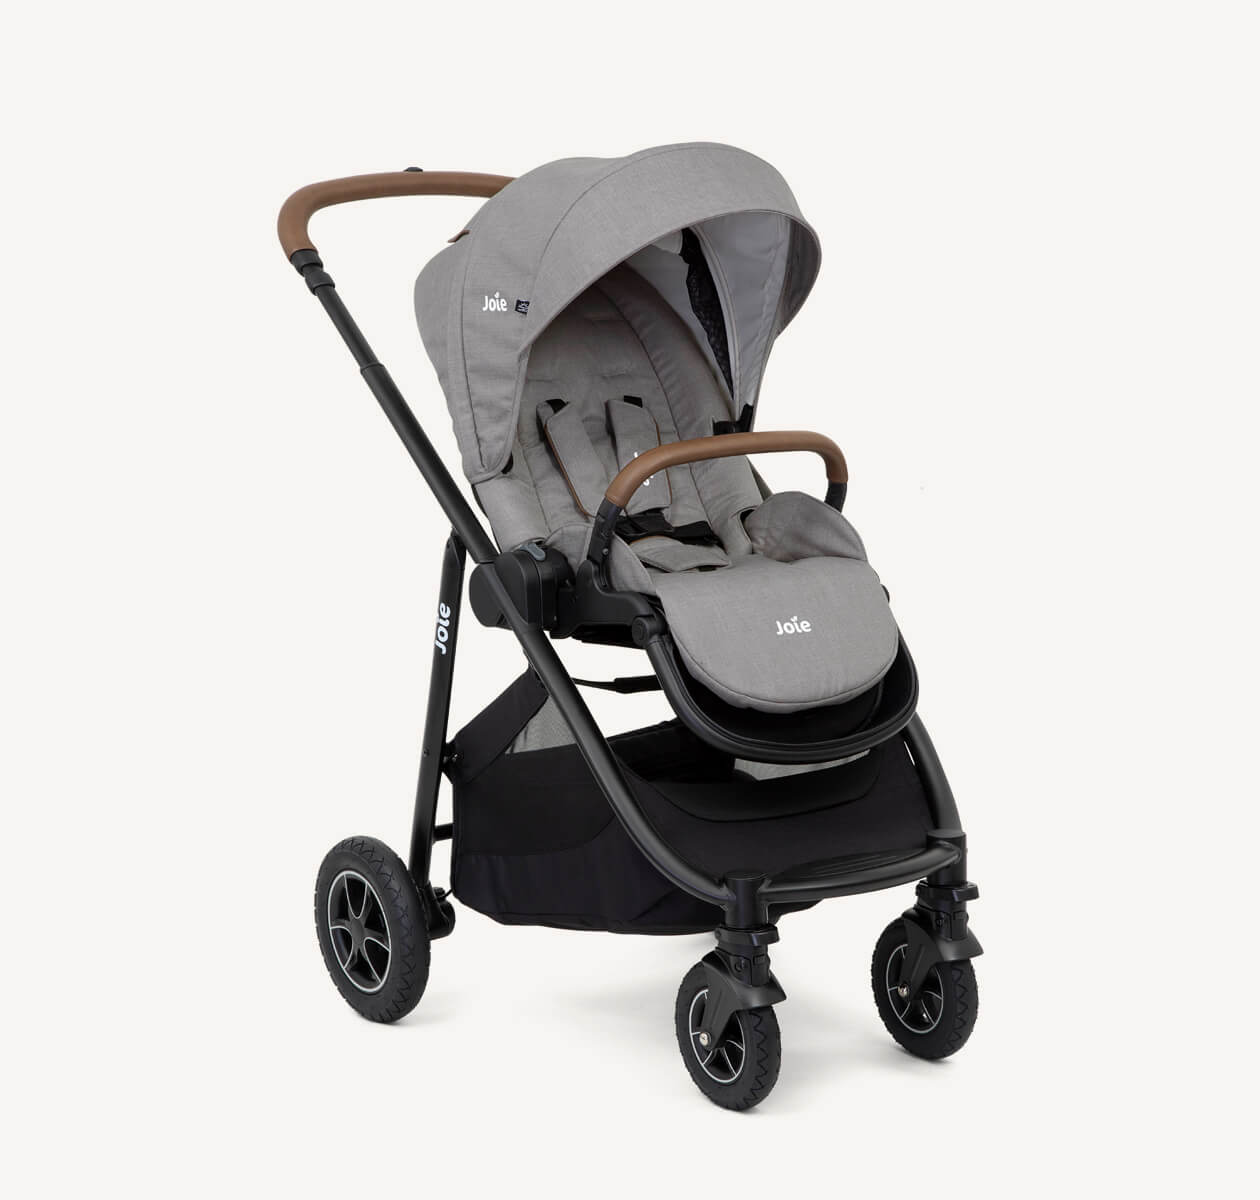  Joie light gray and black versatrax pram positioned at a right angle.